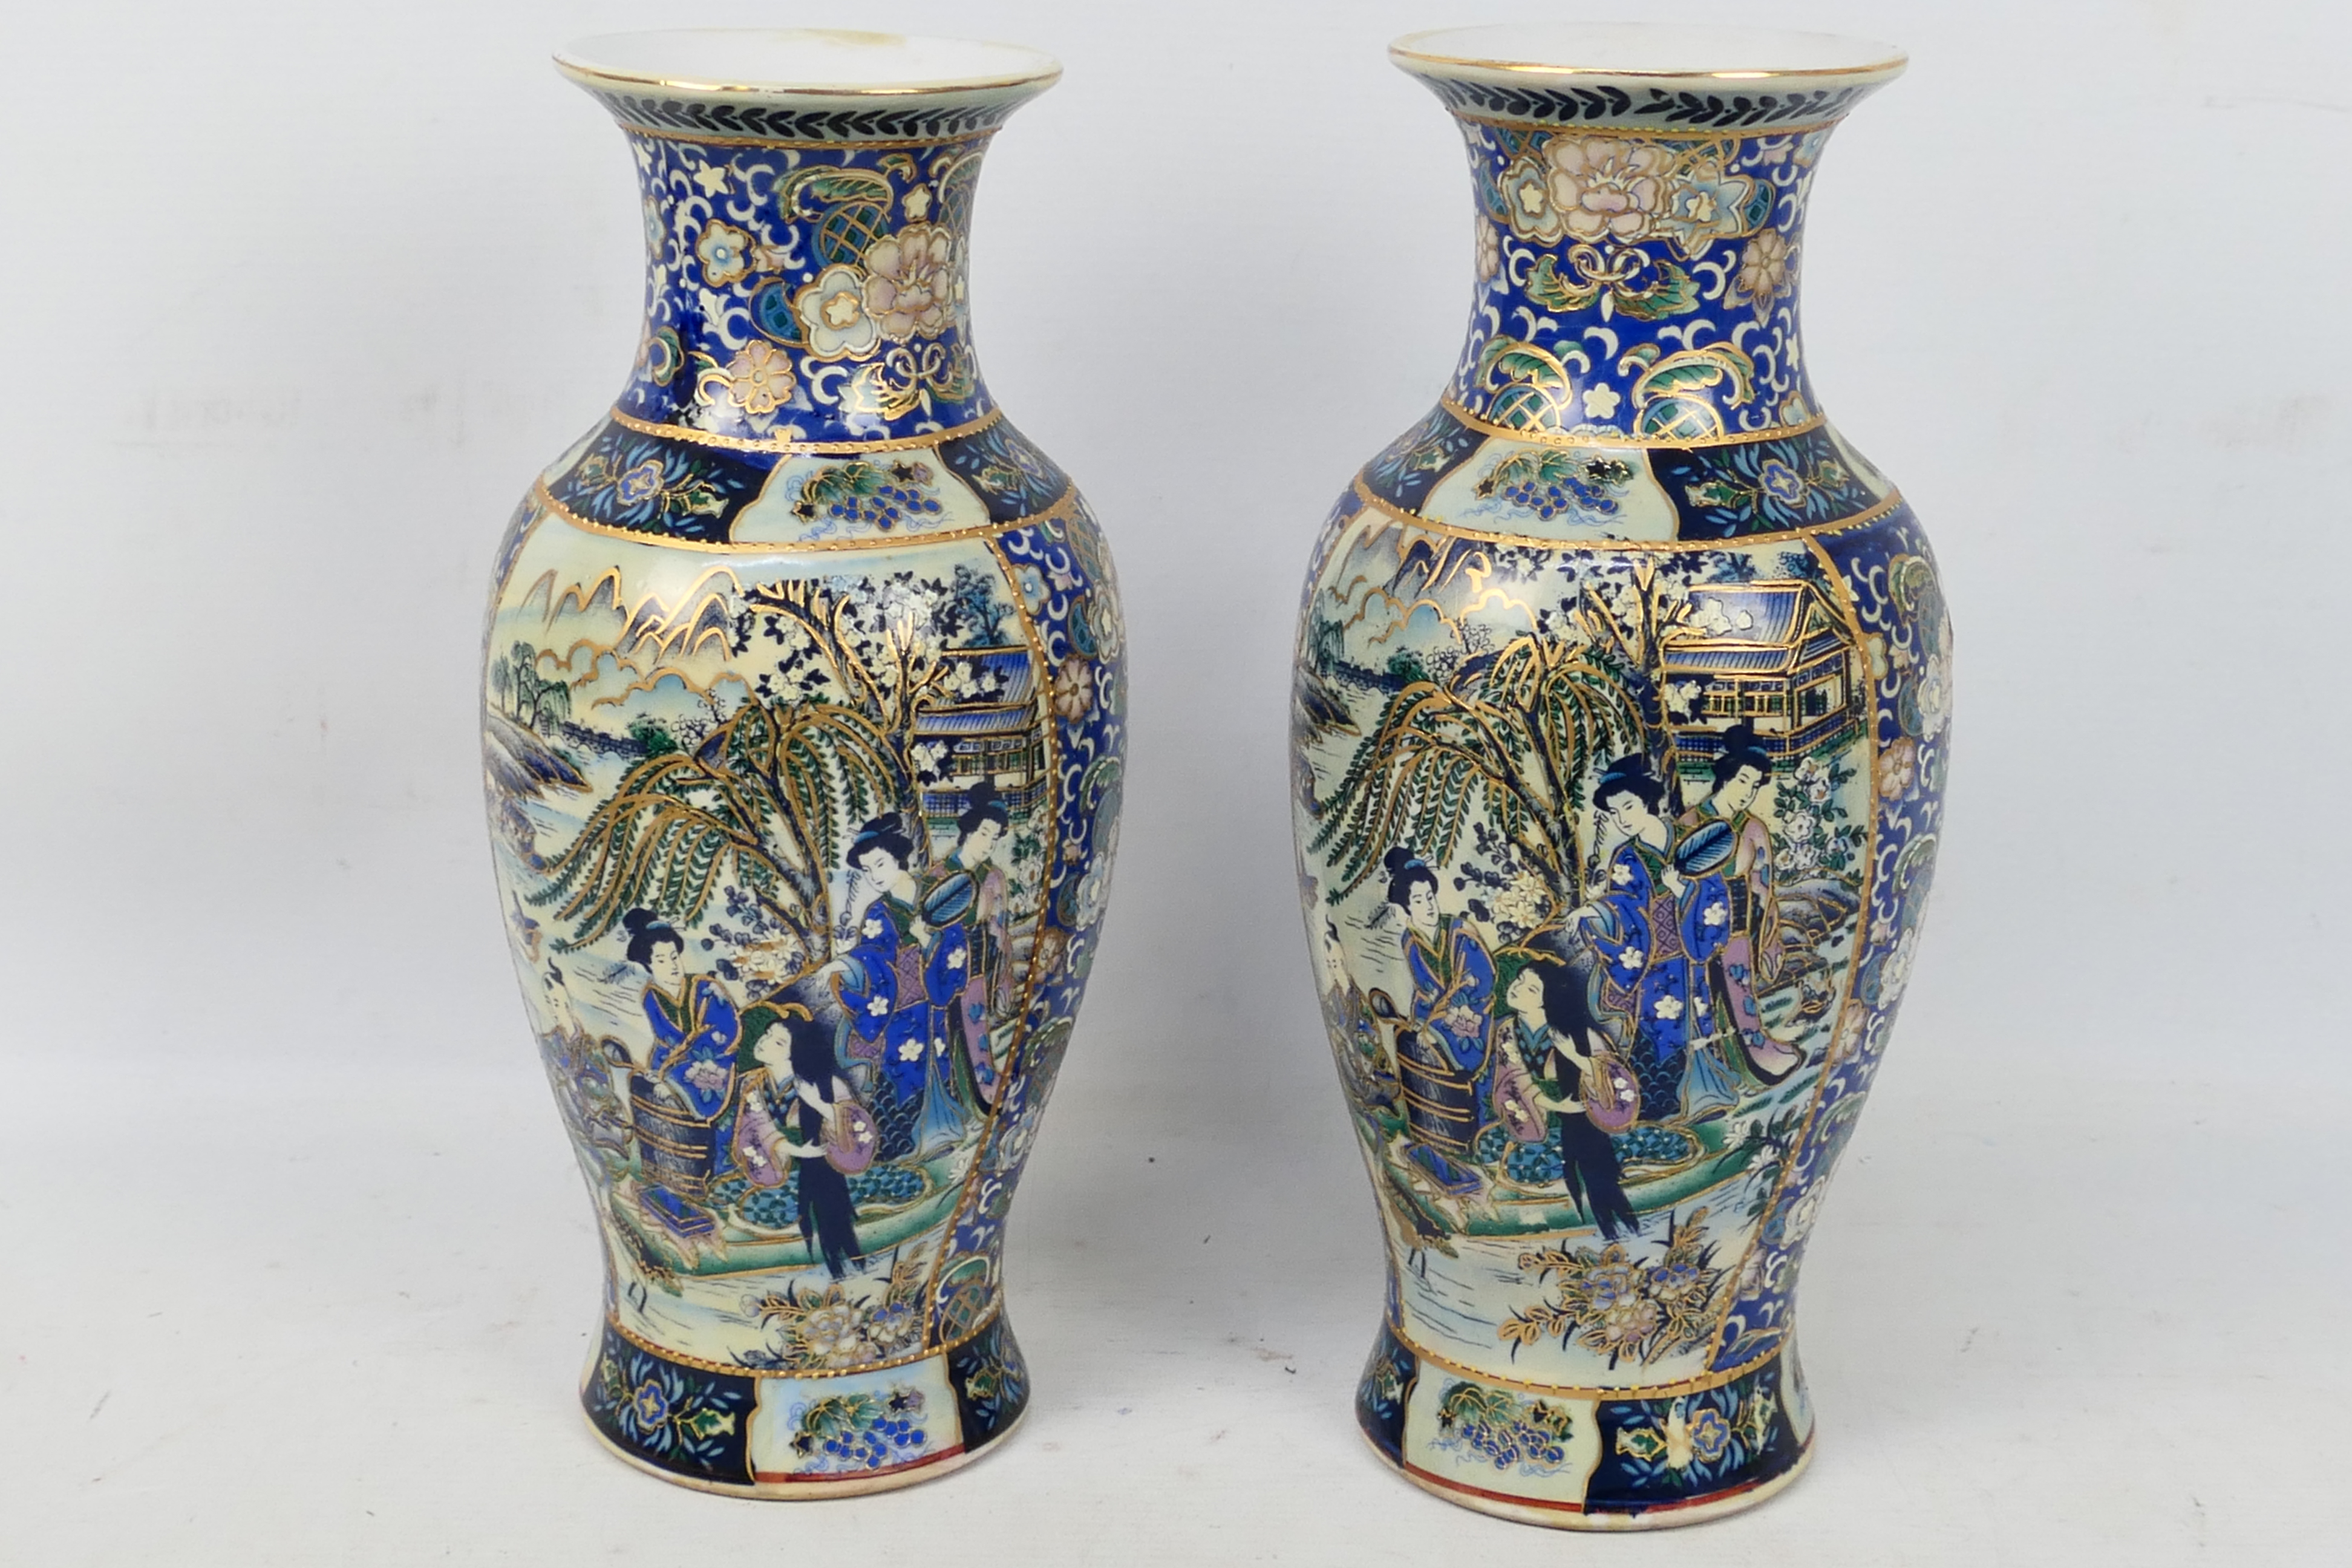 Lot to include a pair of Chinese vases, 30 cm (h), covered steins and Delft wares. - Image 8 of 16